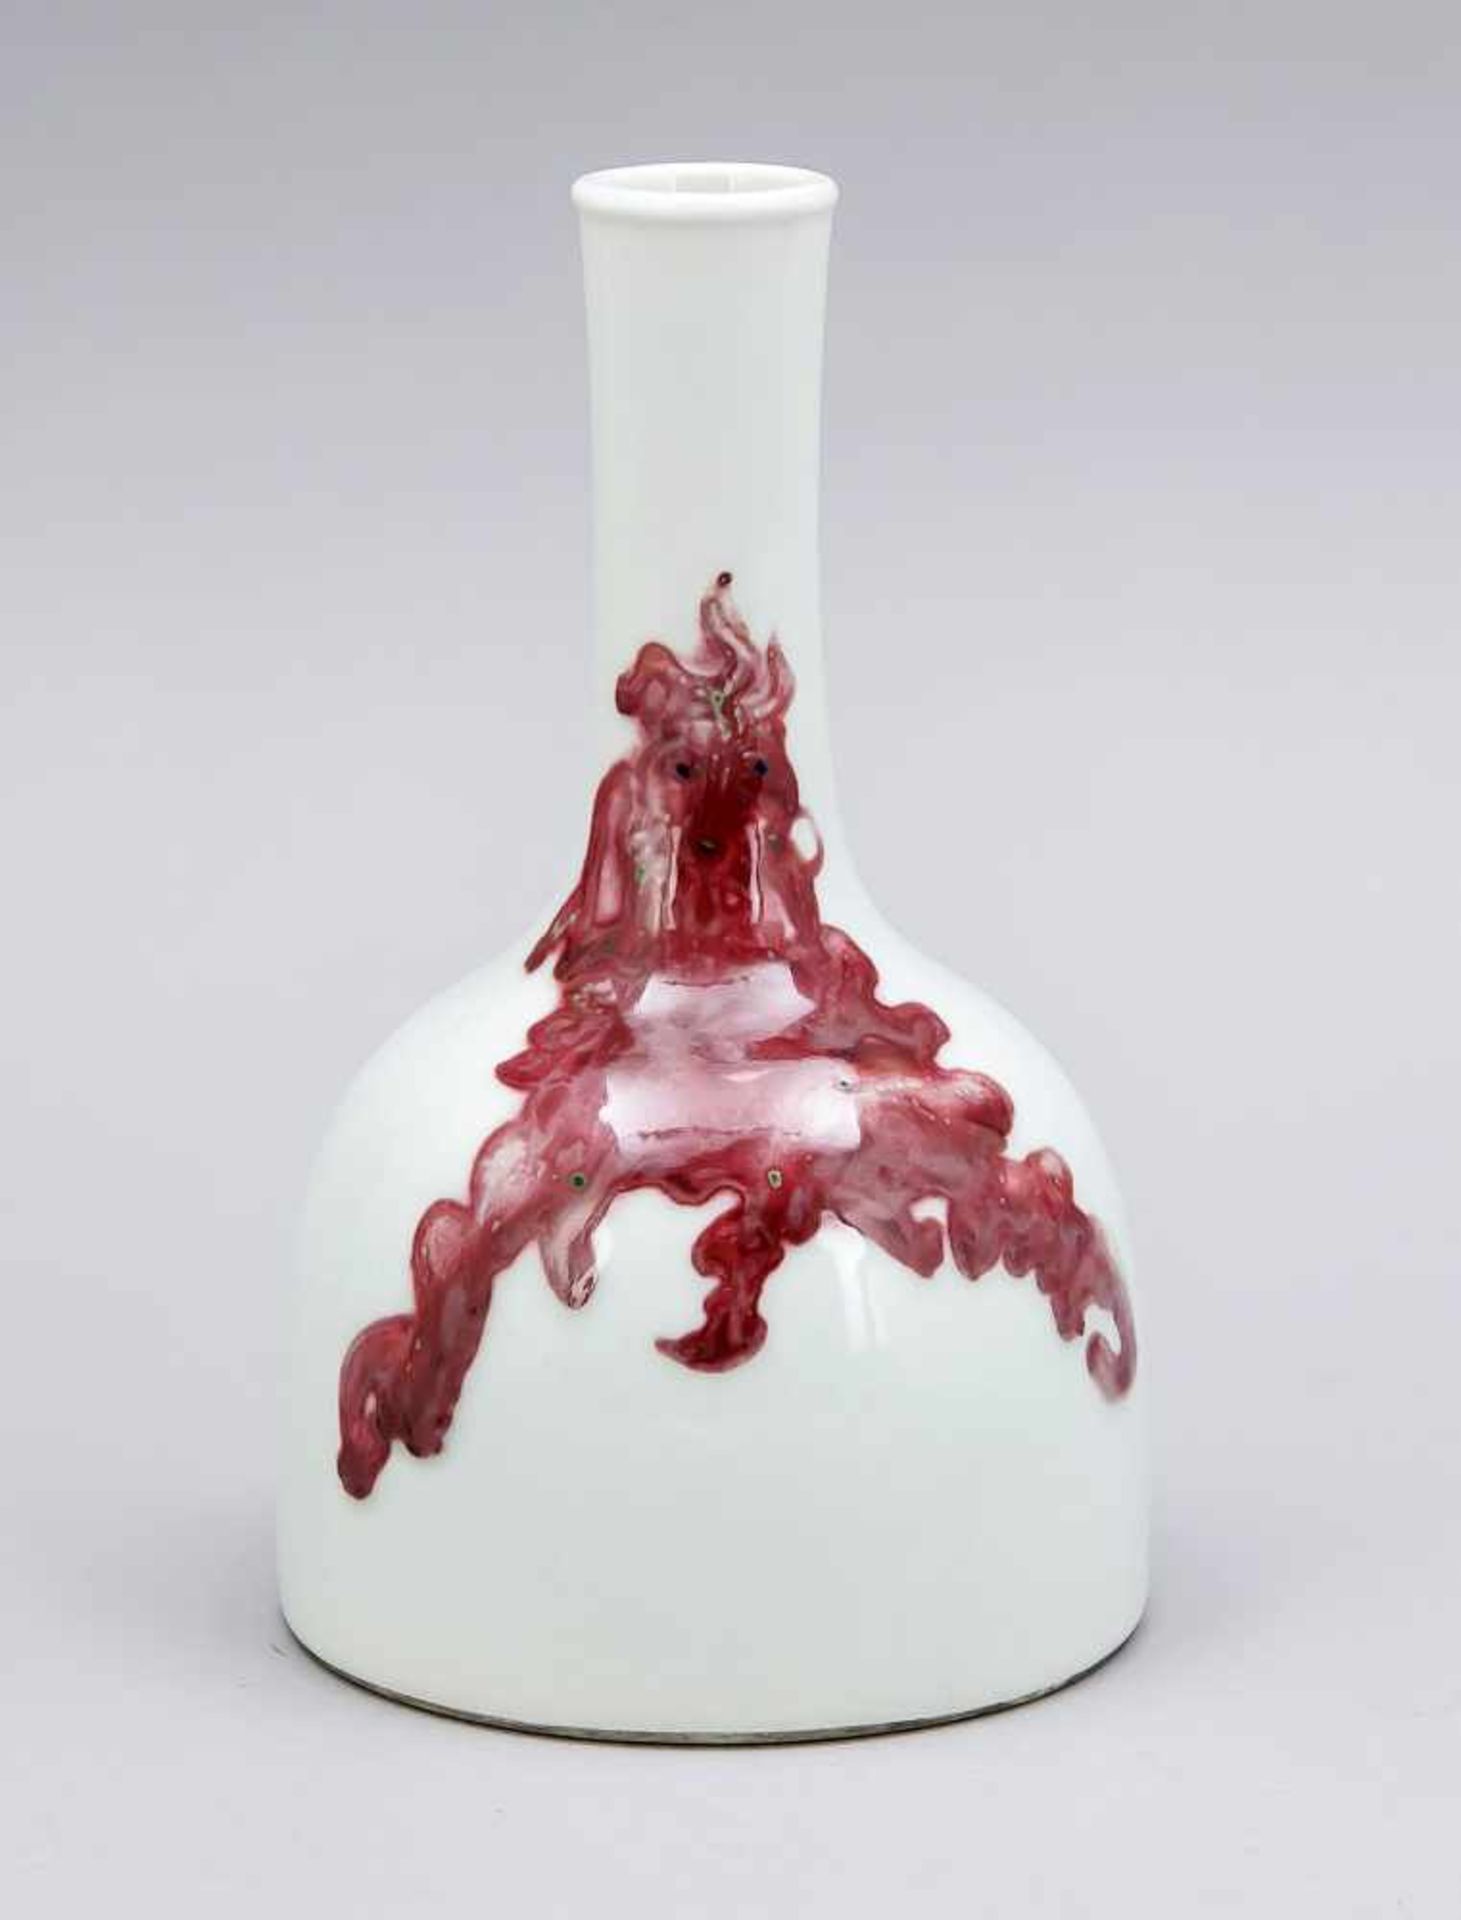 Small Mallet vase, China, 20th cent. Long neck with slightly beaded lips.Minimalistic copper-red